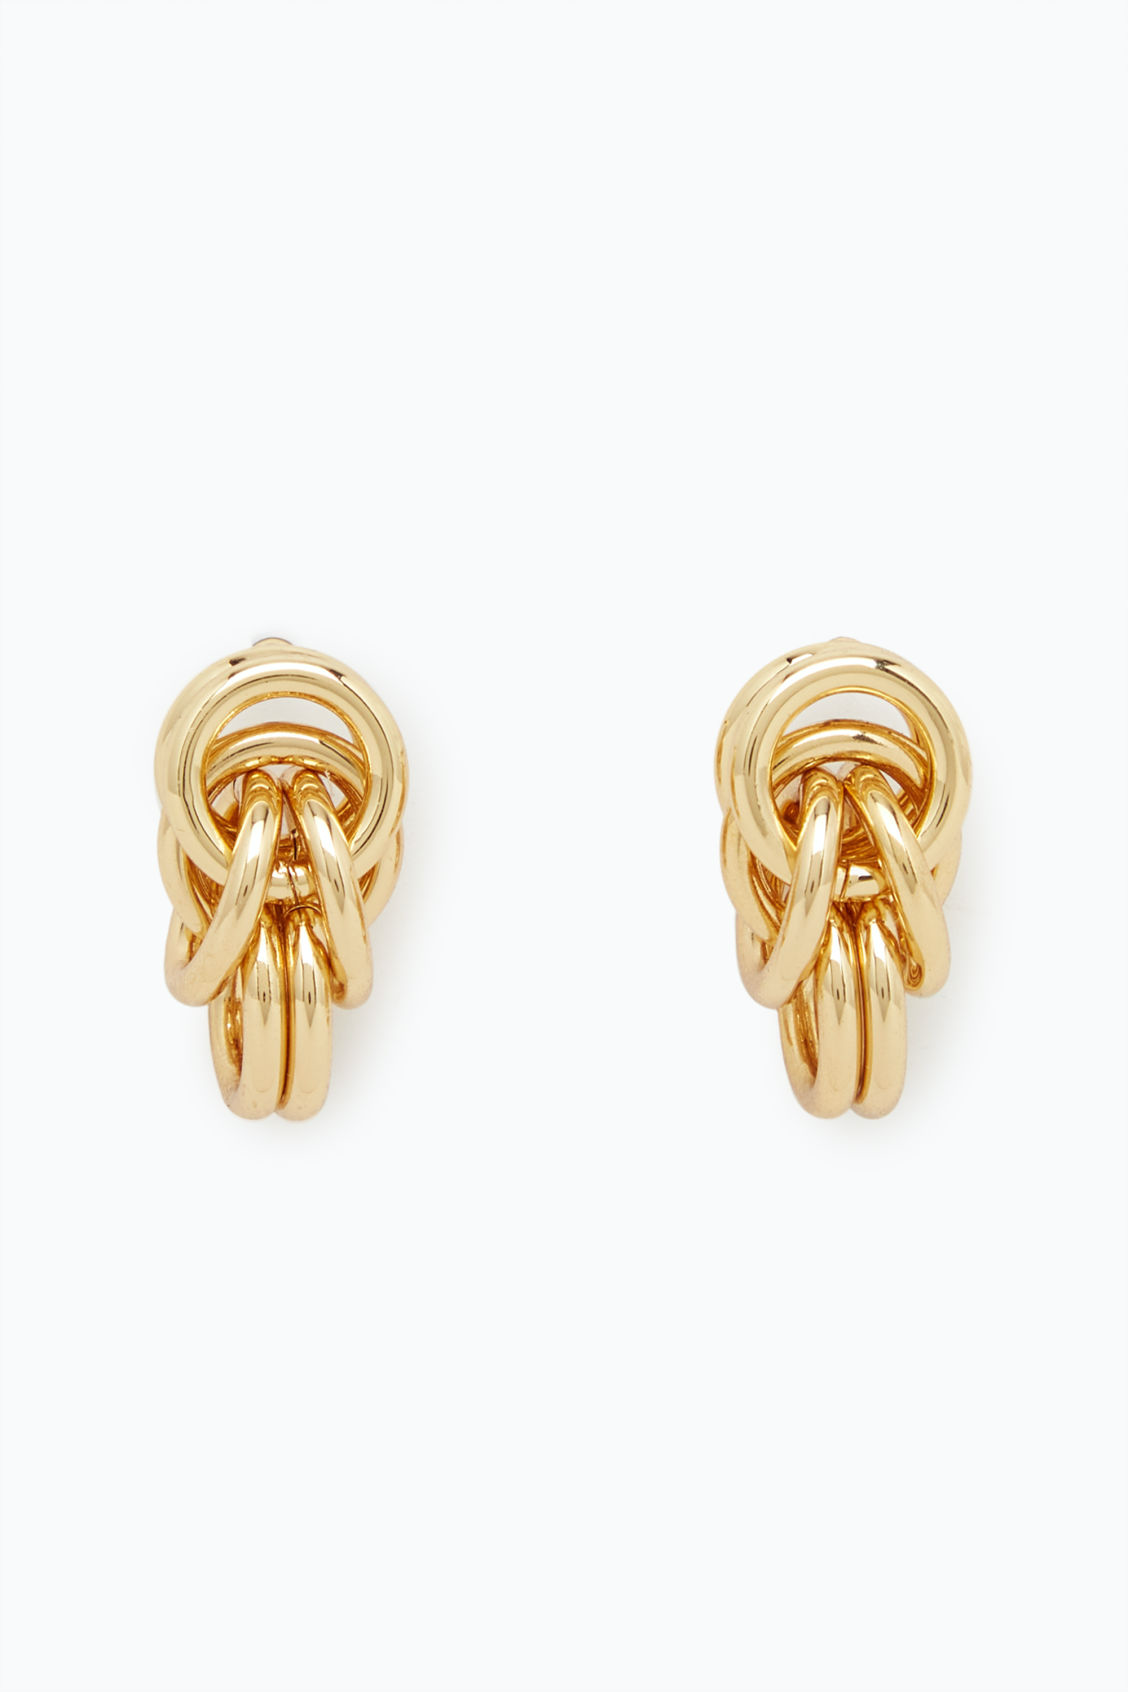 Cos Knotted Stud Earrings €19